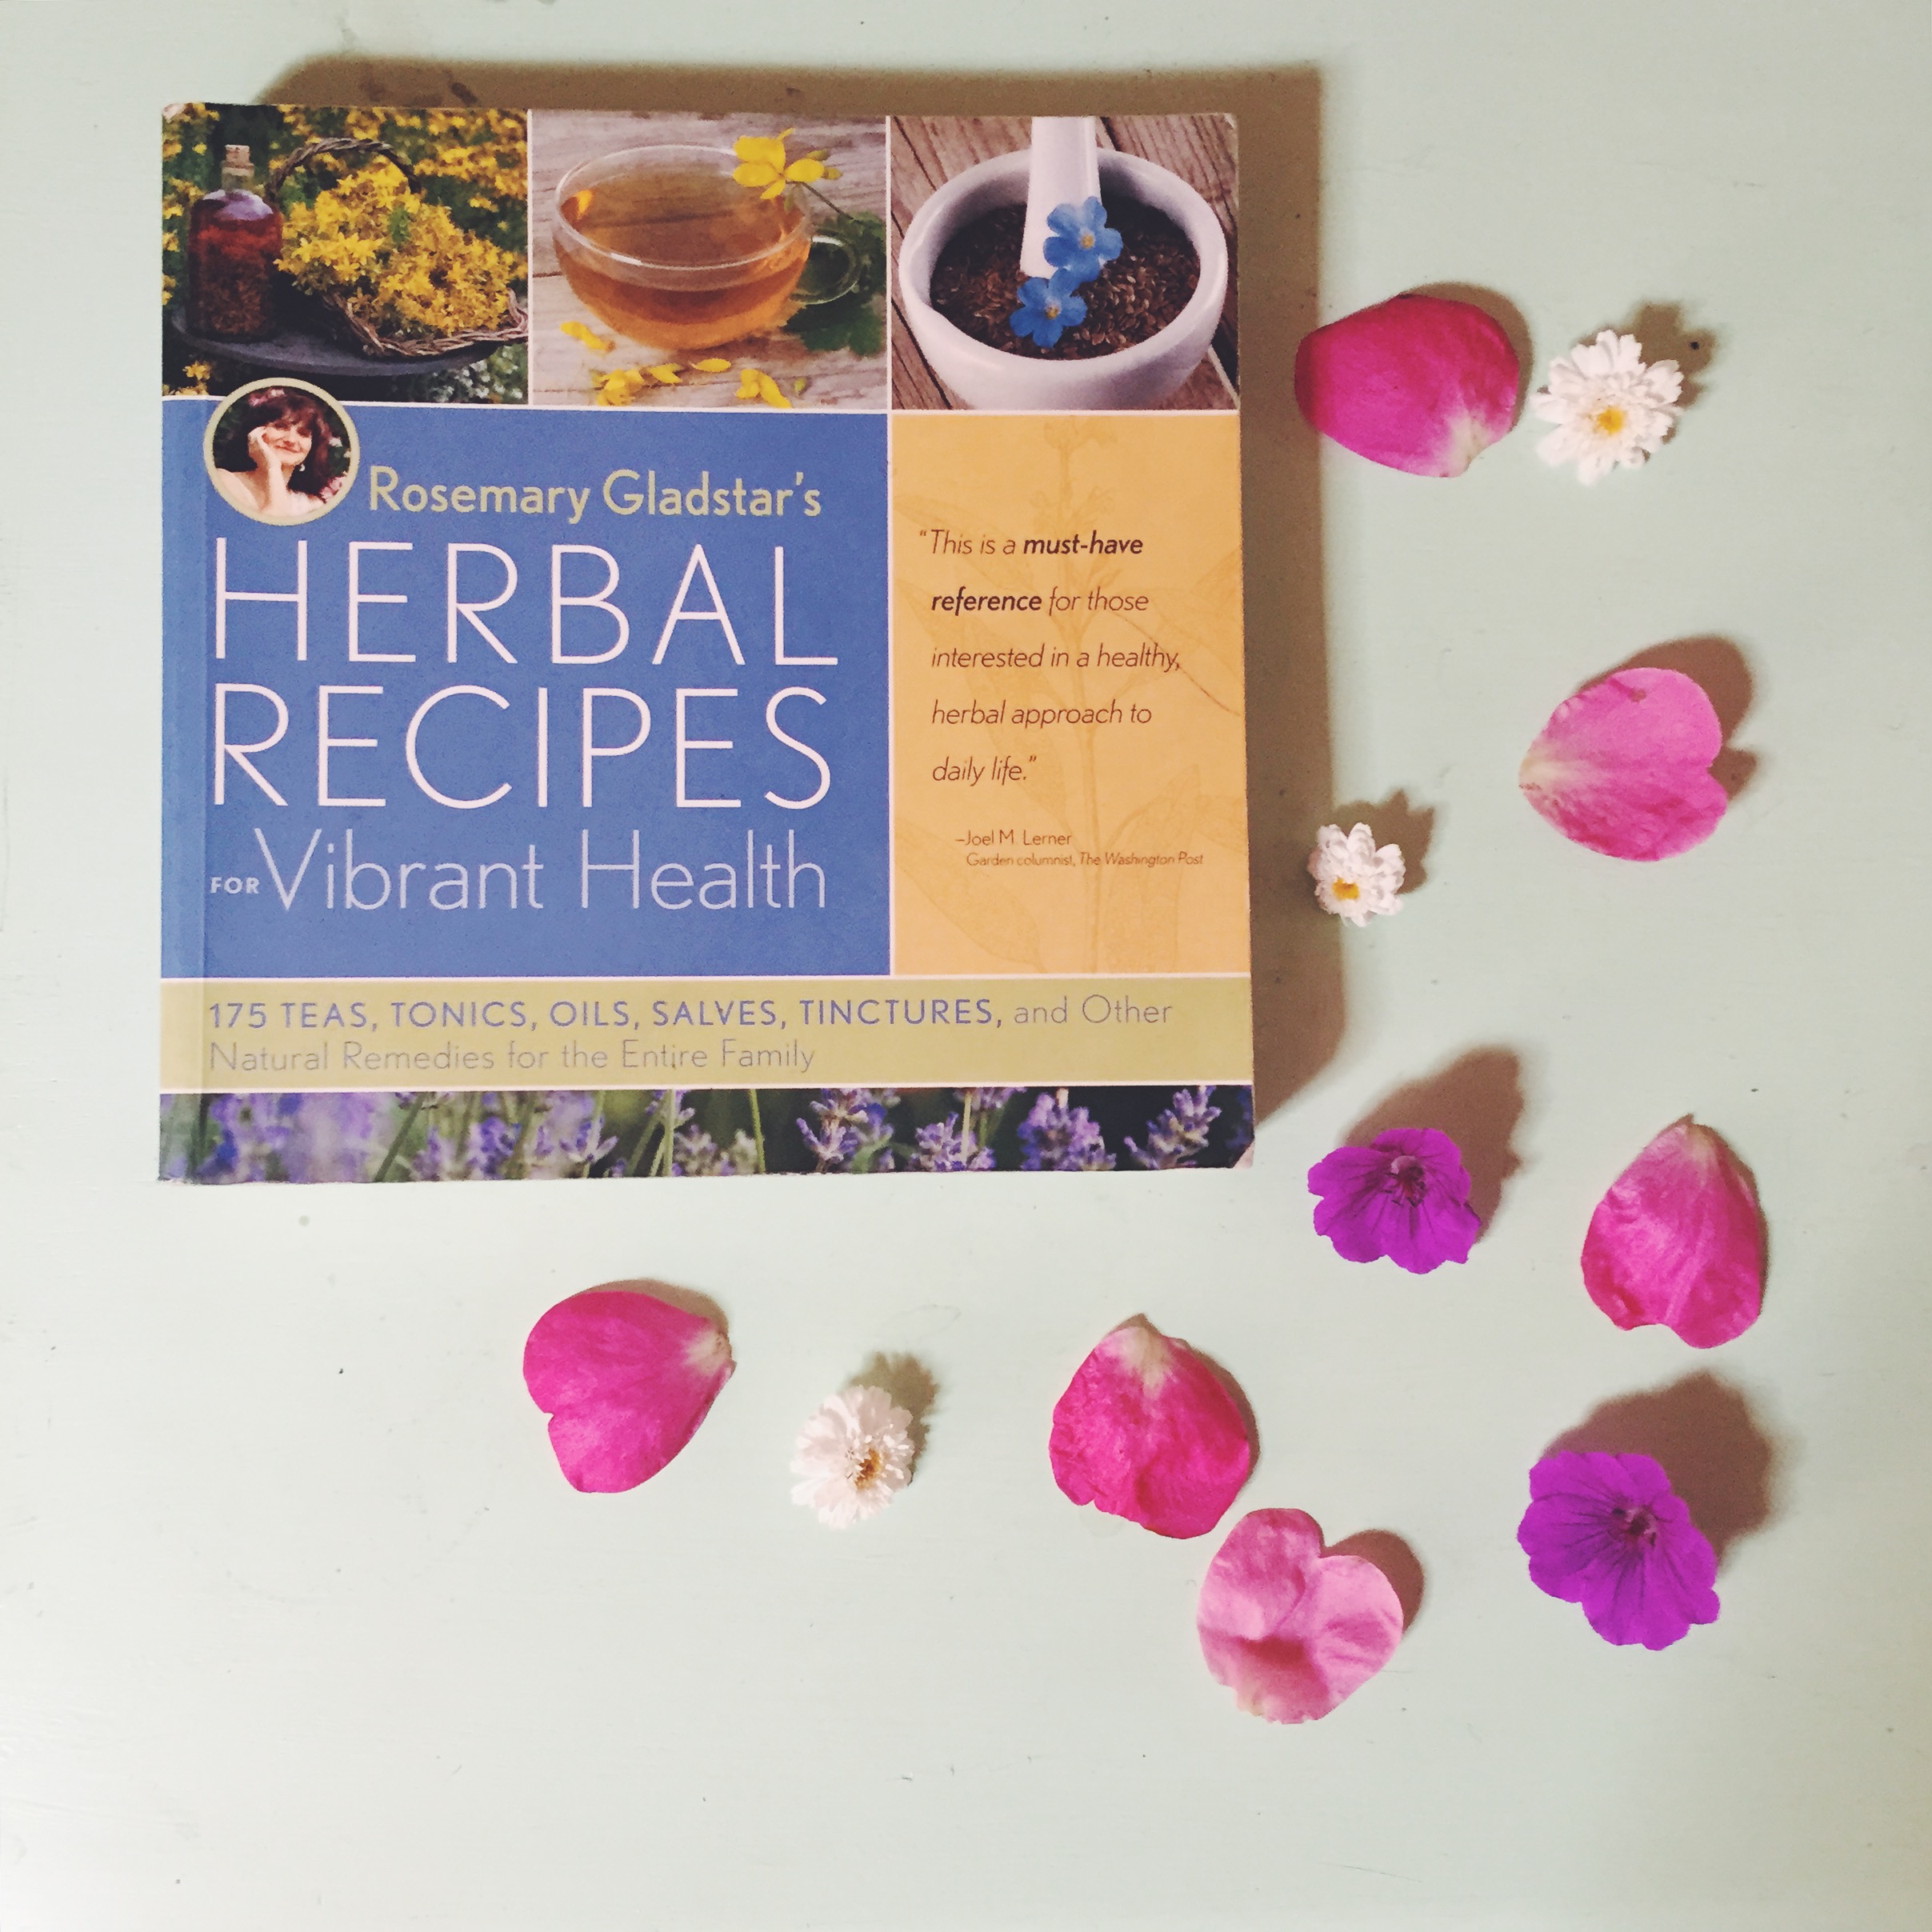 My Wild Life Giveaway with Traditional Medicinals #myherbalstudies #mywildlife